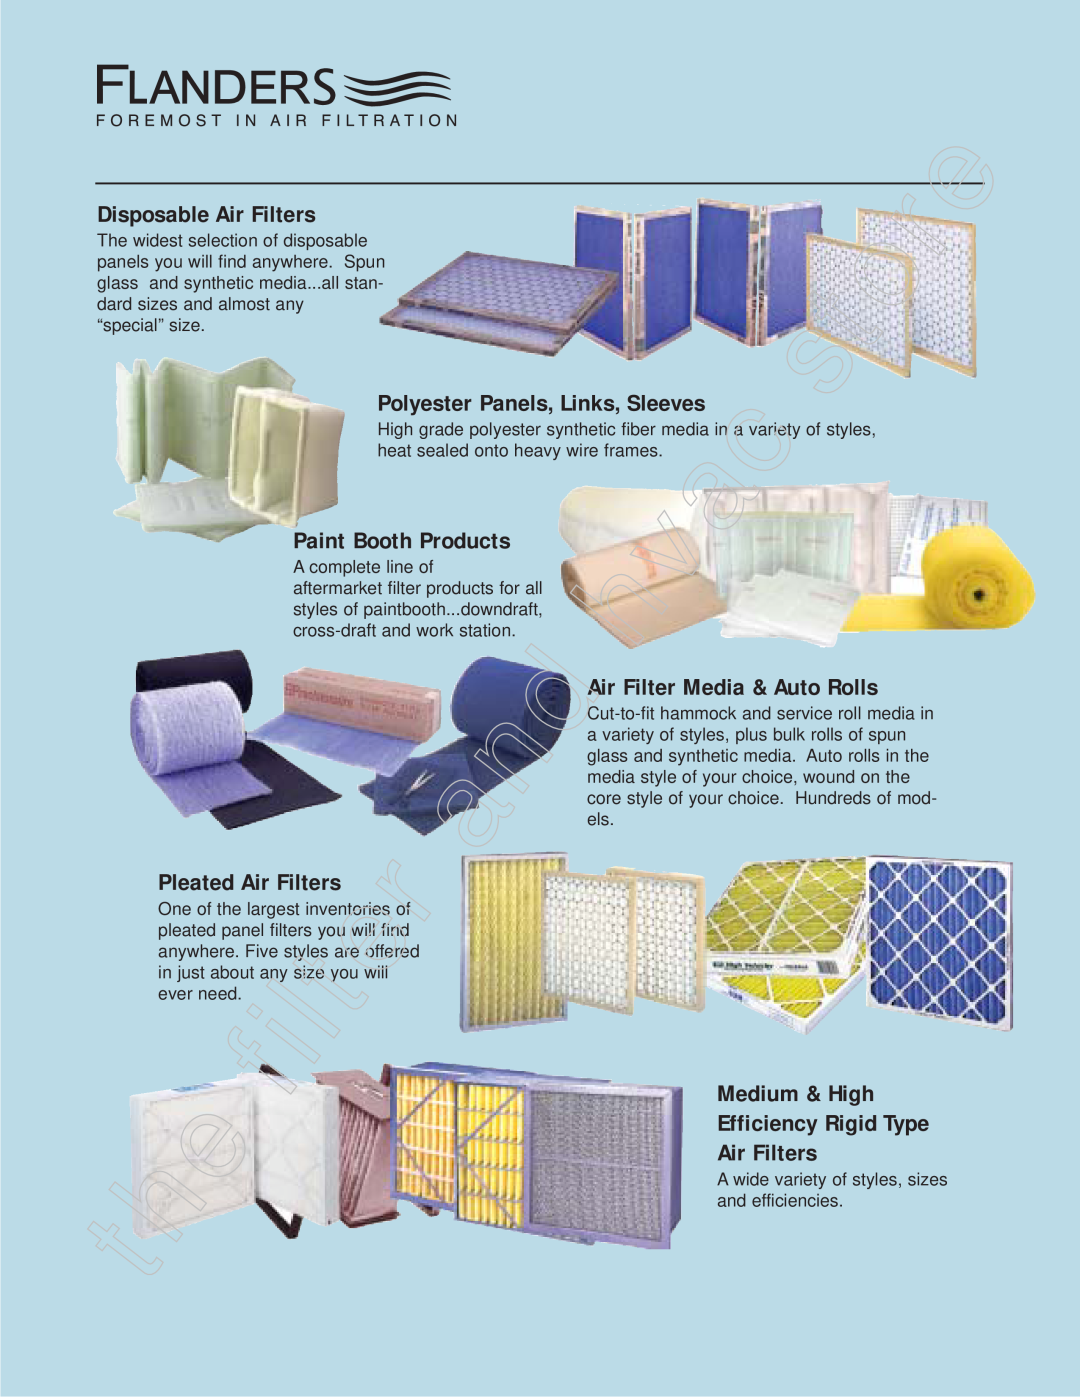 Honeywell 11255 manual Disposable Air Filters, Polyester Panels, Links, Sleeves, Paint Booth Products, Pleated Air Filters 